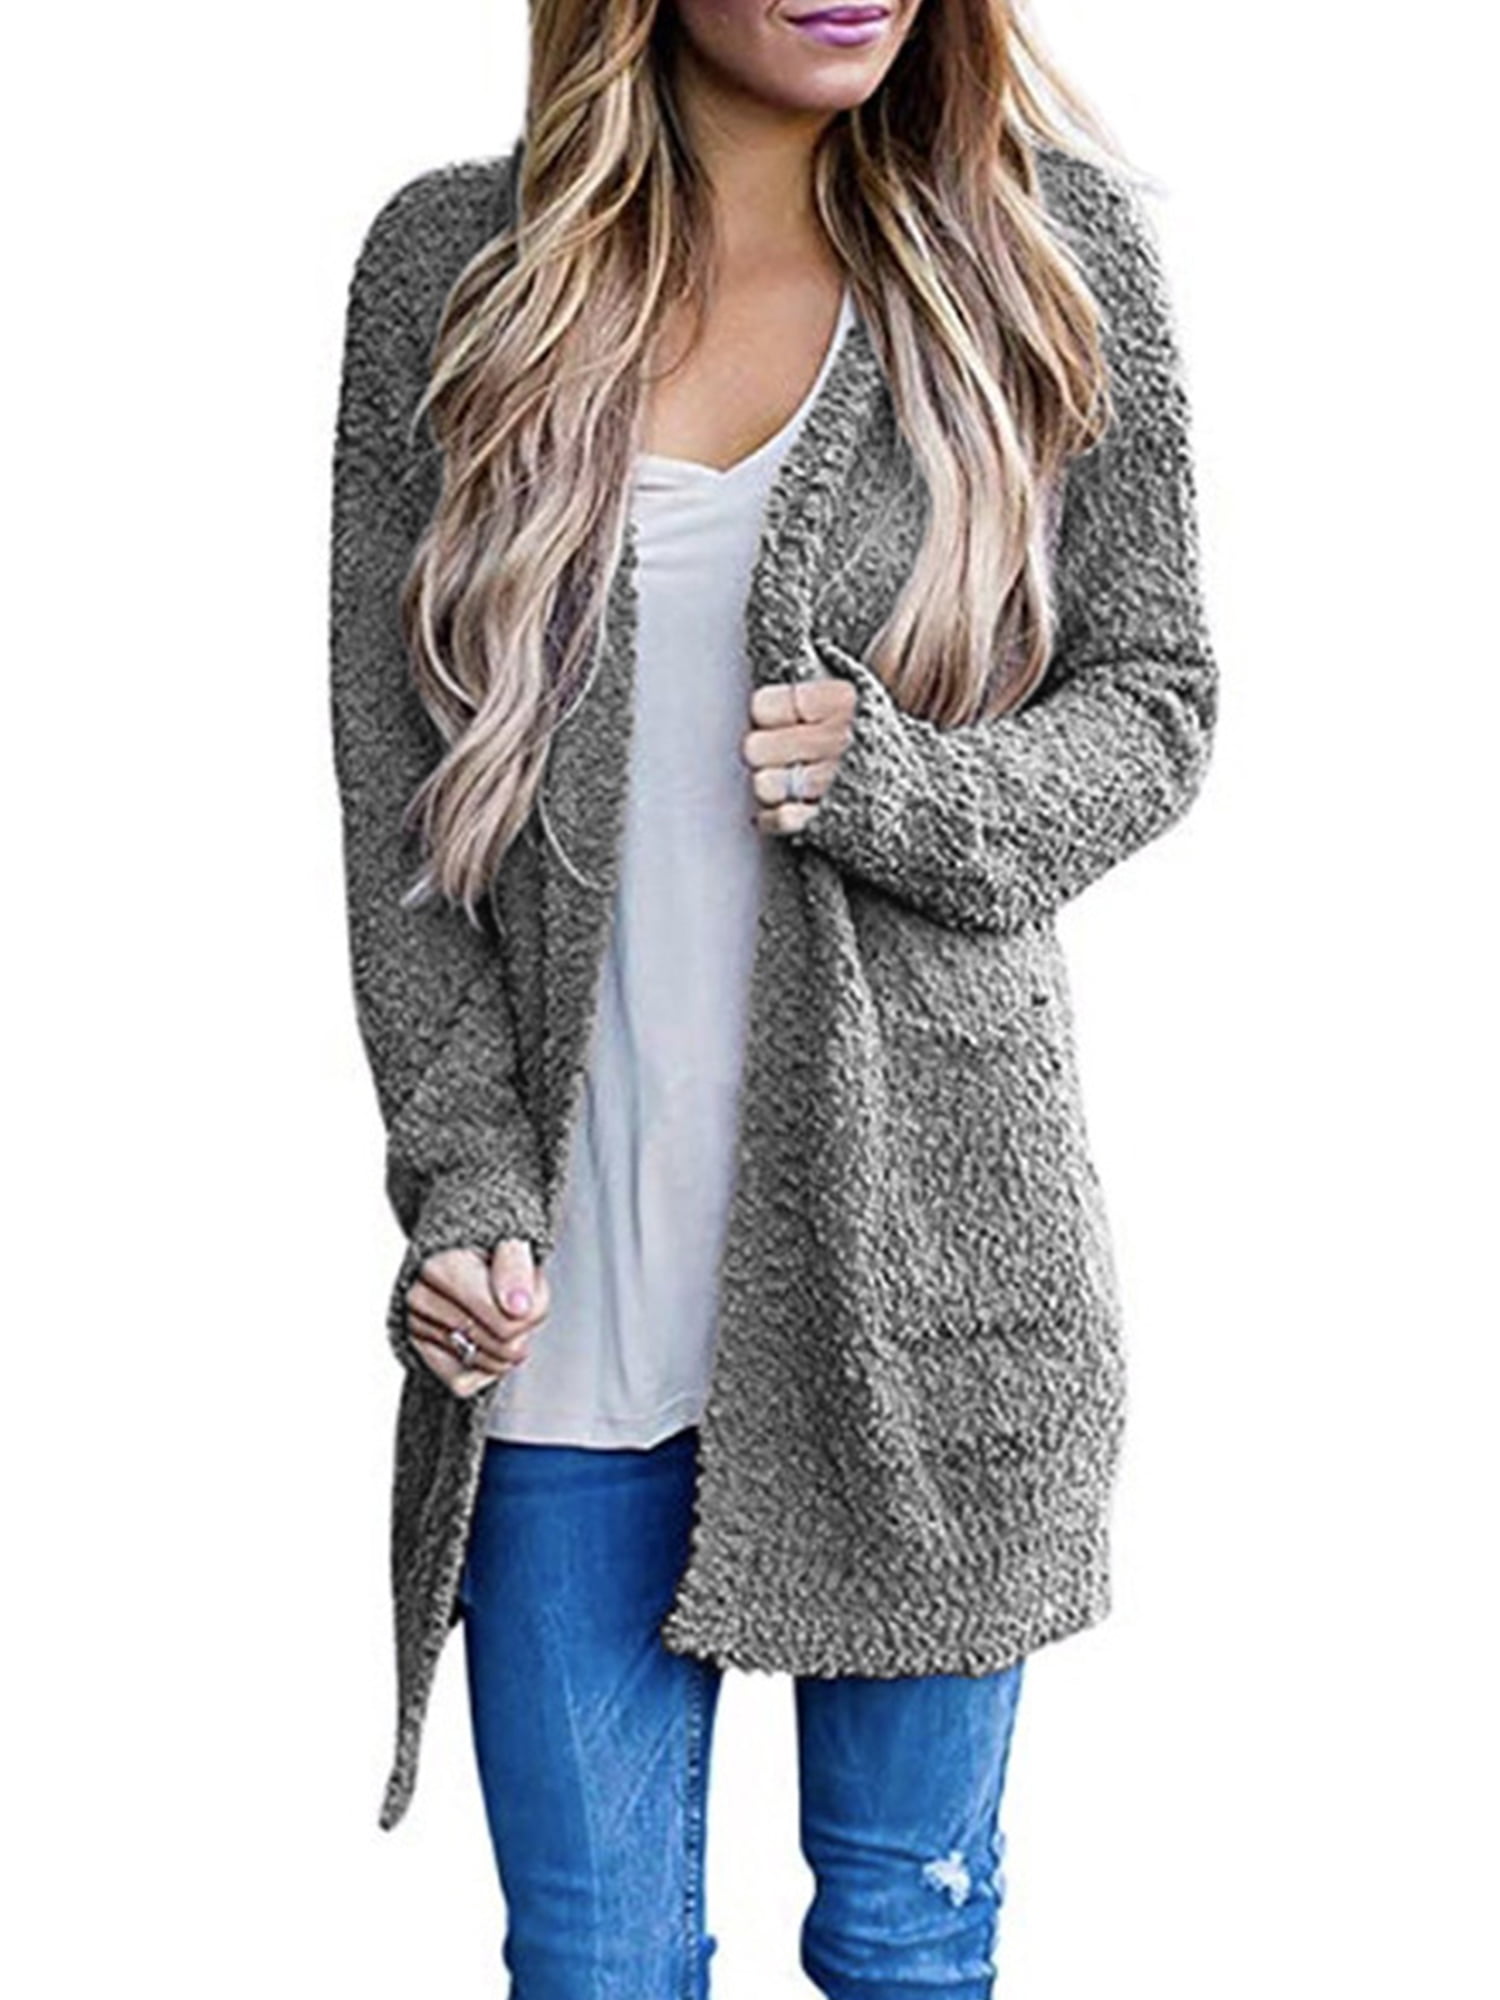 Elapsy Womens Casual Fuzzy Casual Loose Pullover Hooded Sweatshirt with Pockets Outwear